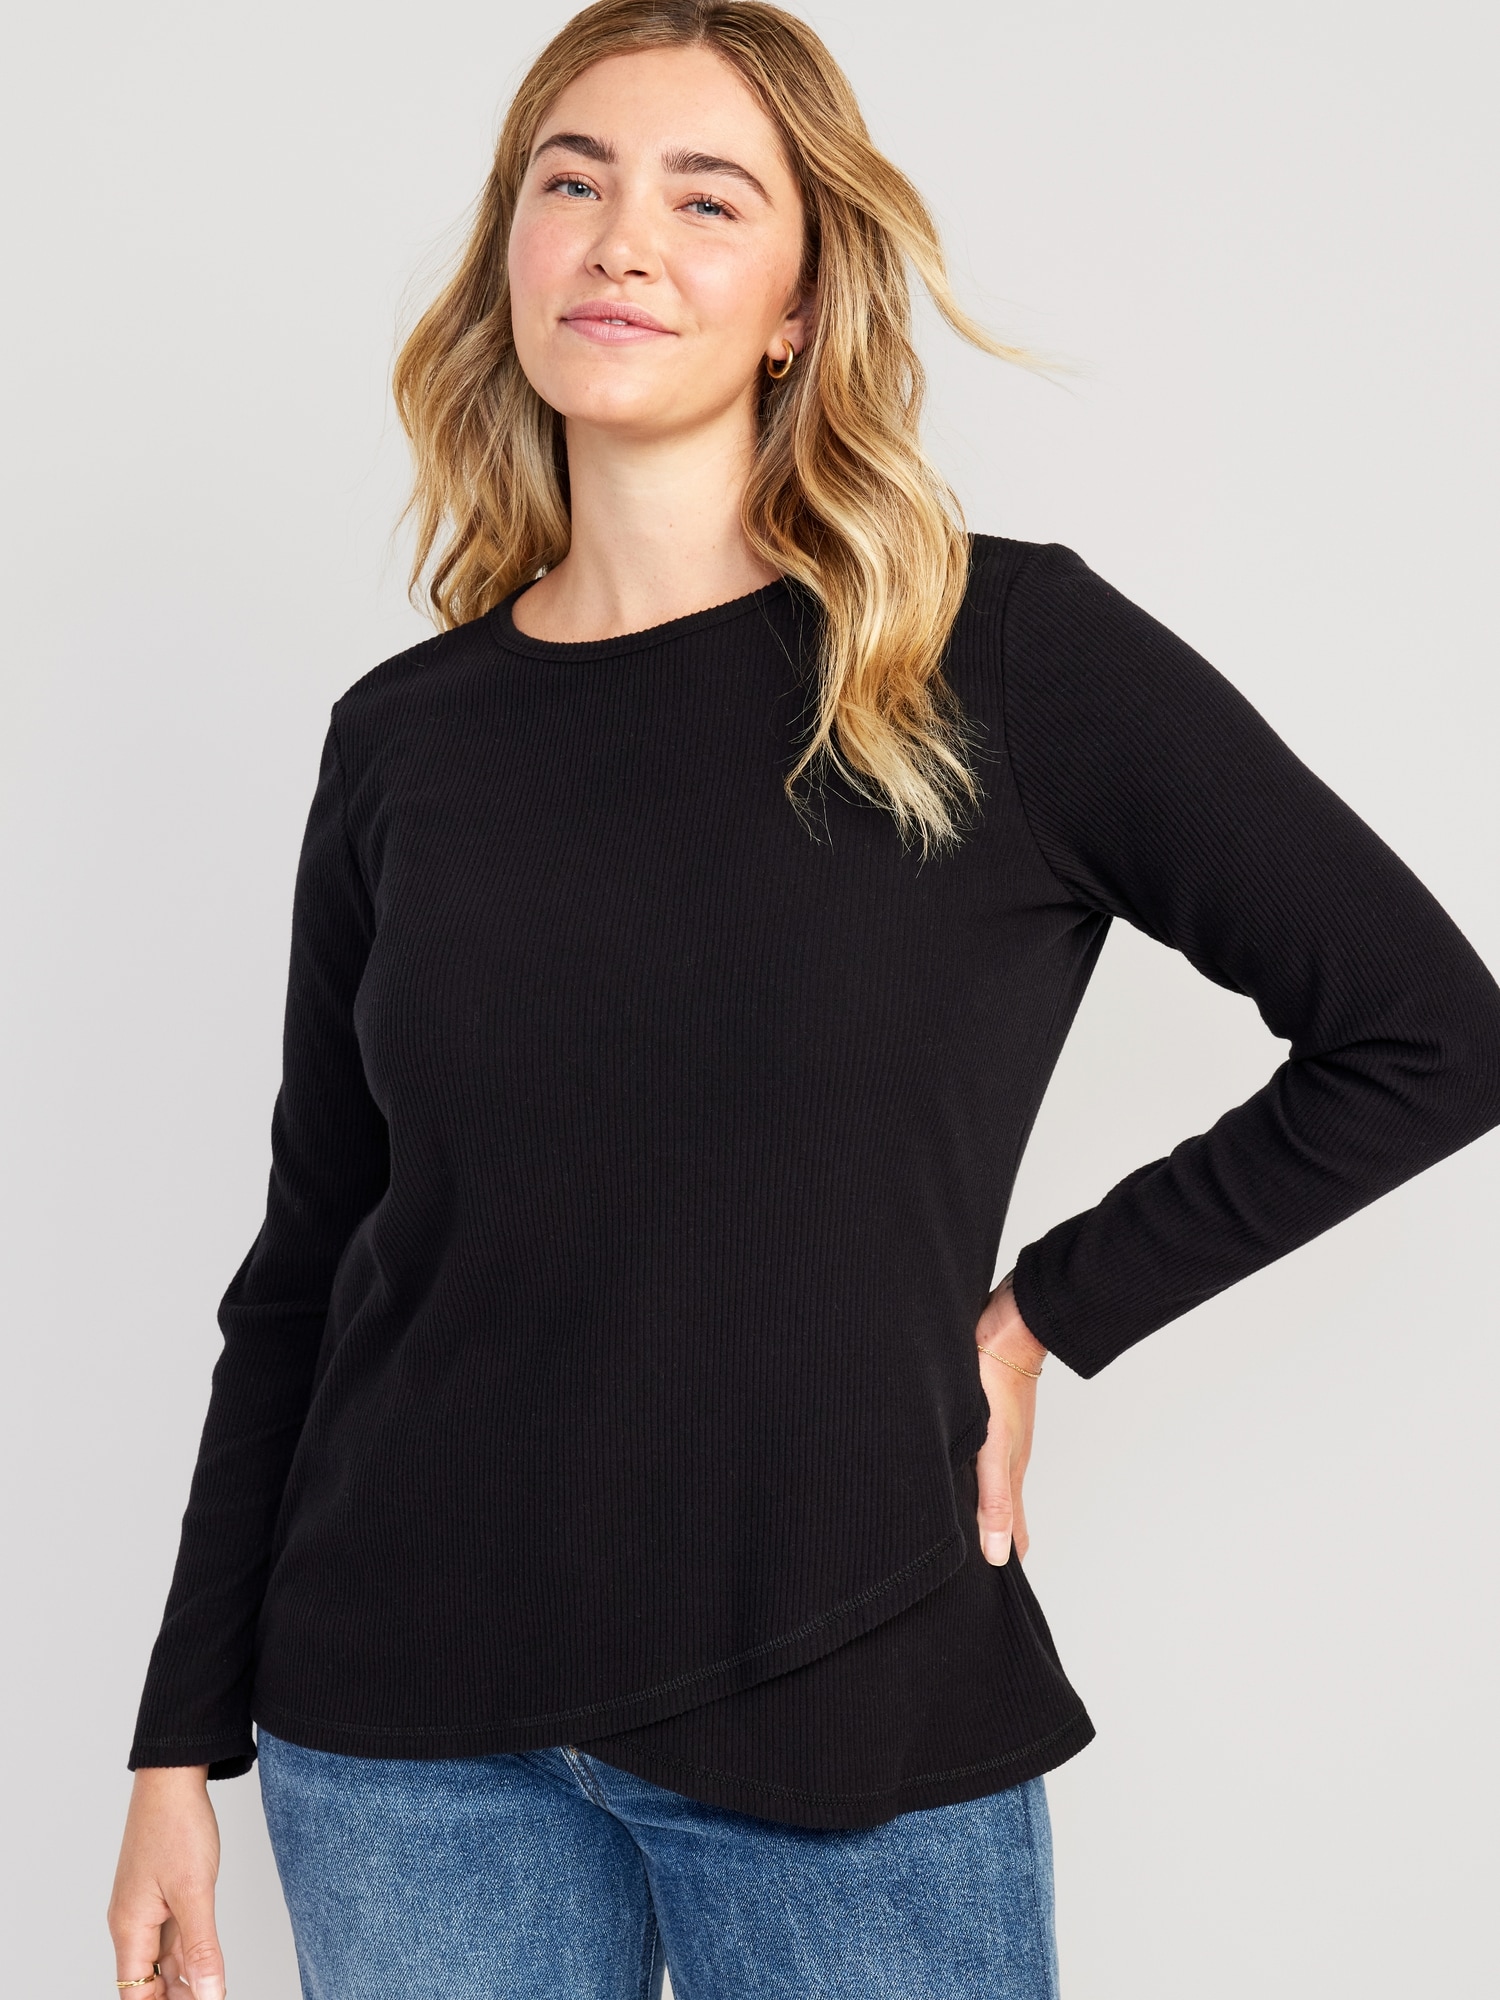 Maternity Long Sleeve Wrap Front T-Shirt